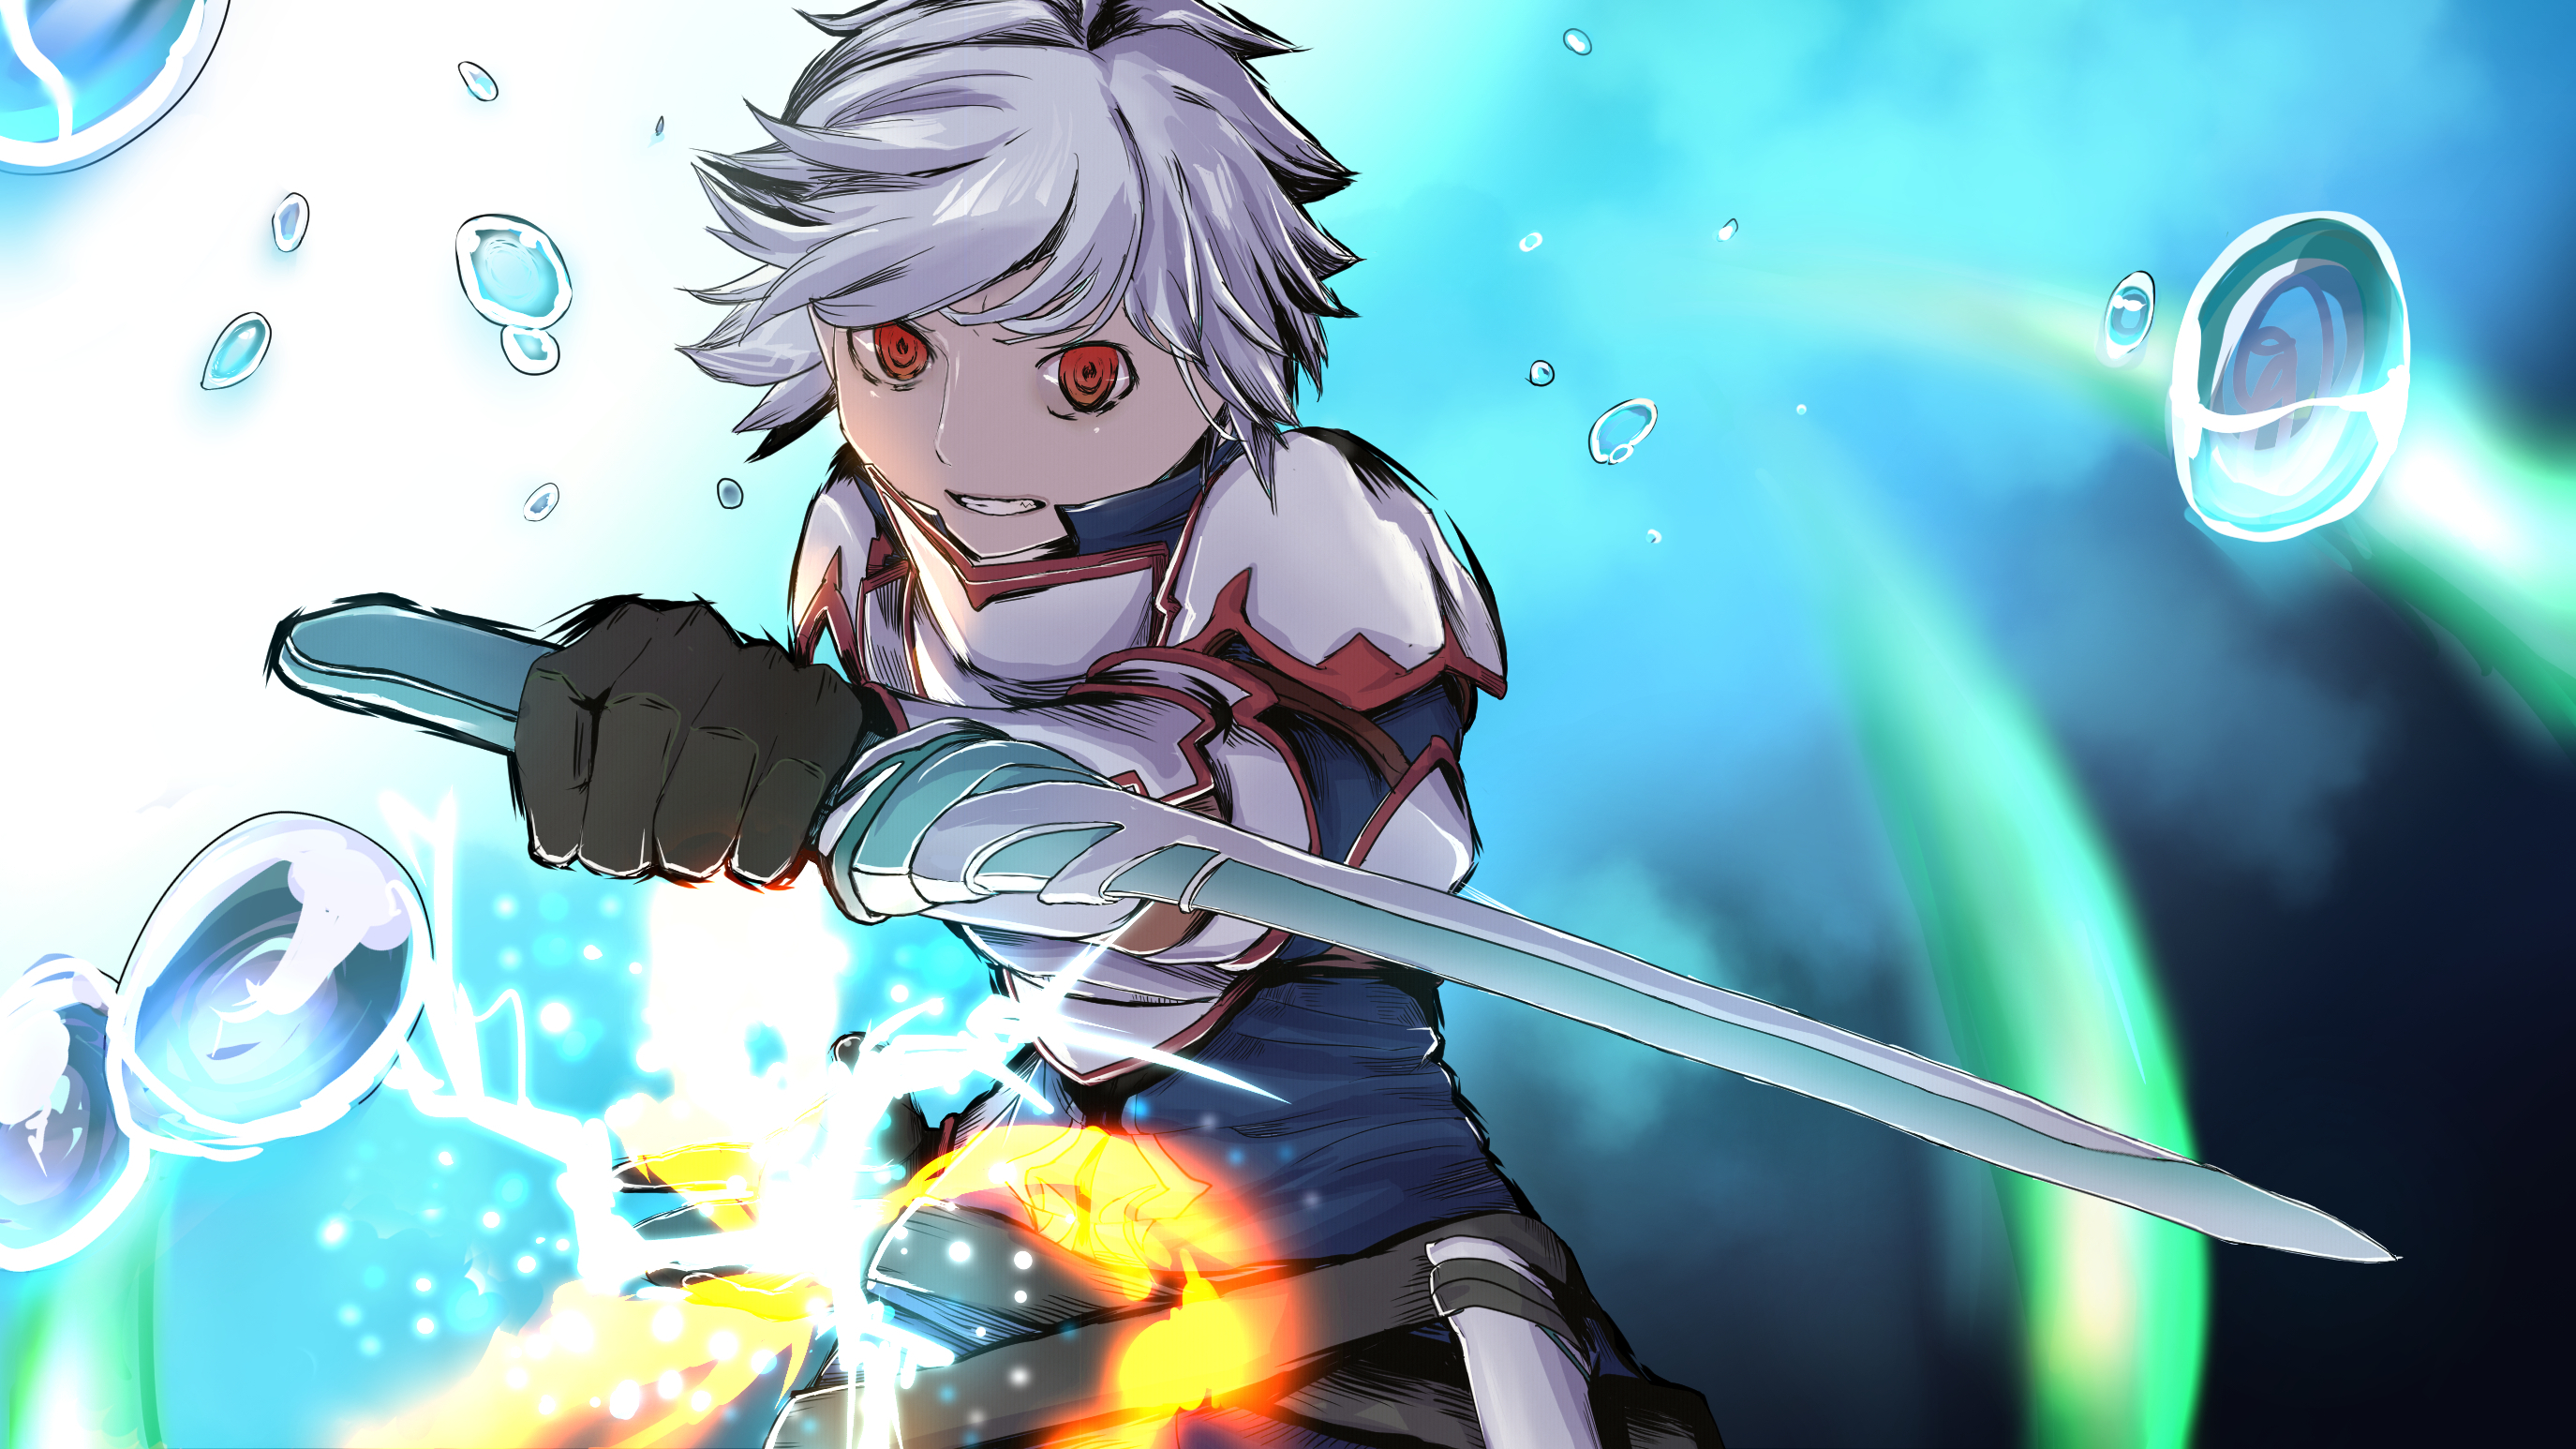 DanMachi, also known as "Is It Wrong to Try to Pick Up Girls in a Dungeon?", is a popular anime series that premiered in 2015. The anime is based on a light novel series of the same name, written by Fujino Ōmori and illustrated by Suzuhito Yasuda.